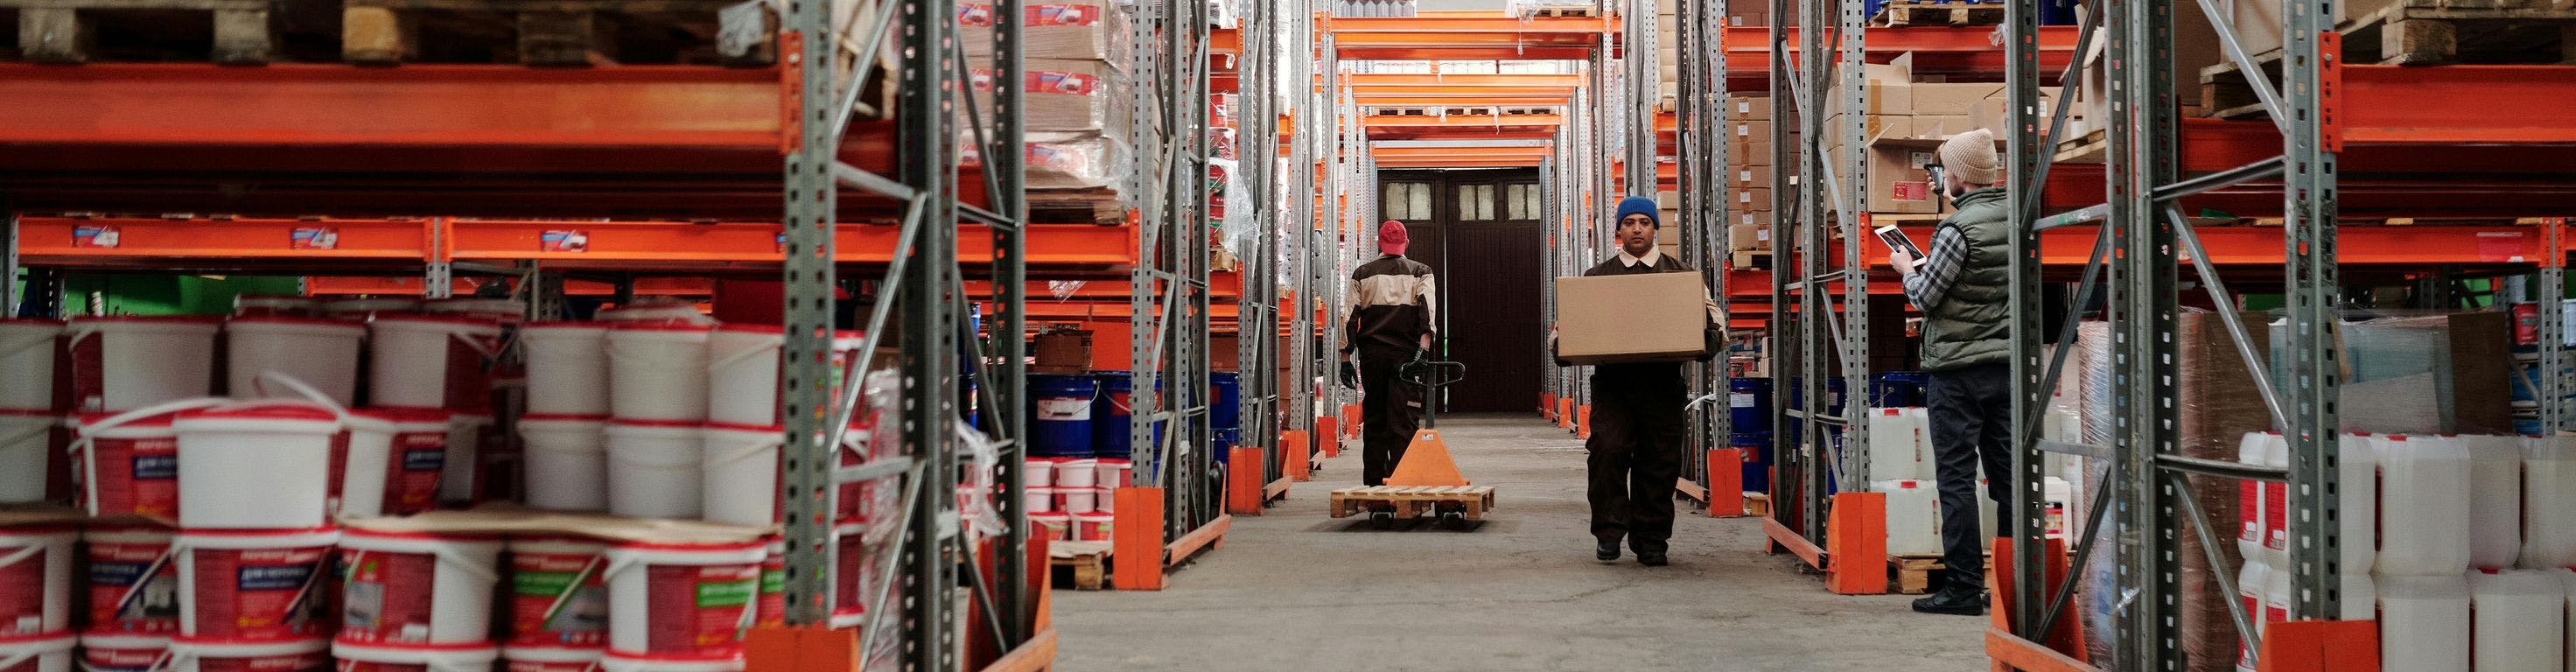 People working in the distance in an orange warehouse